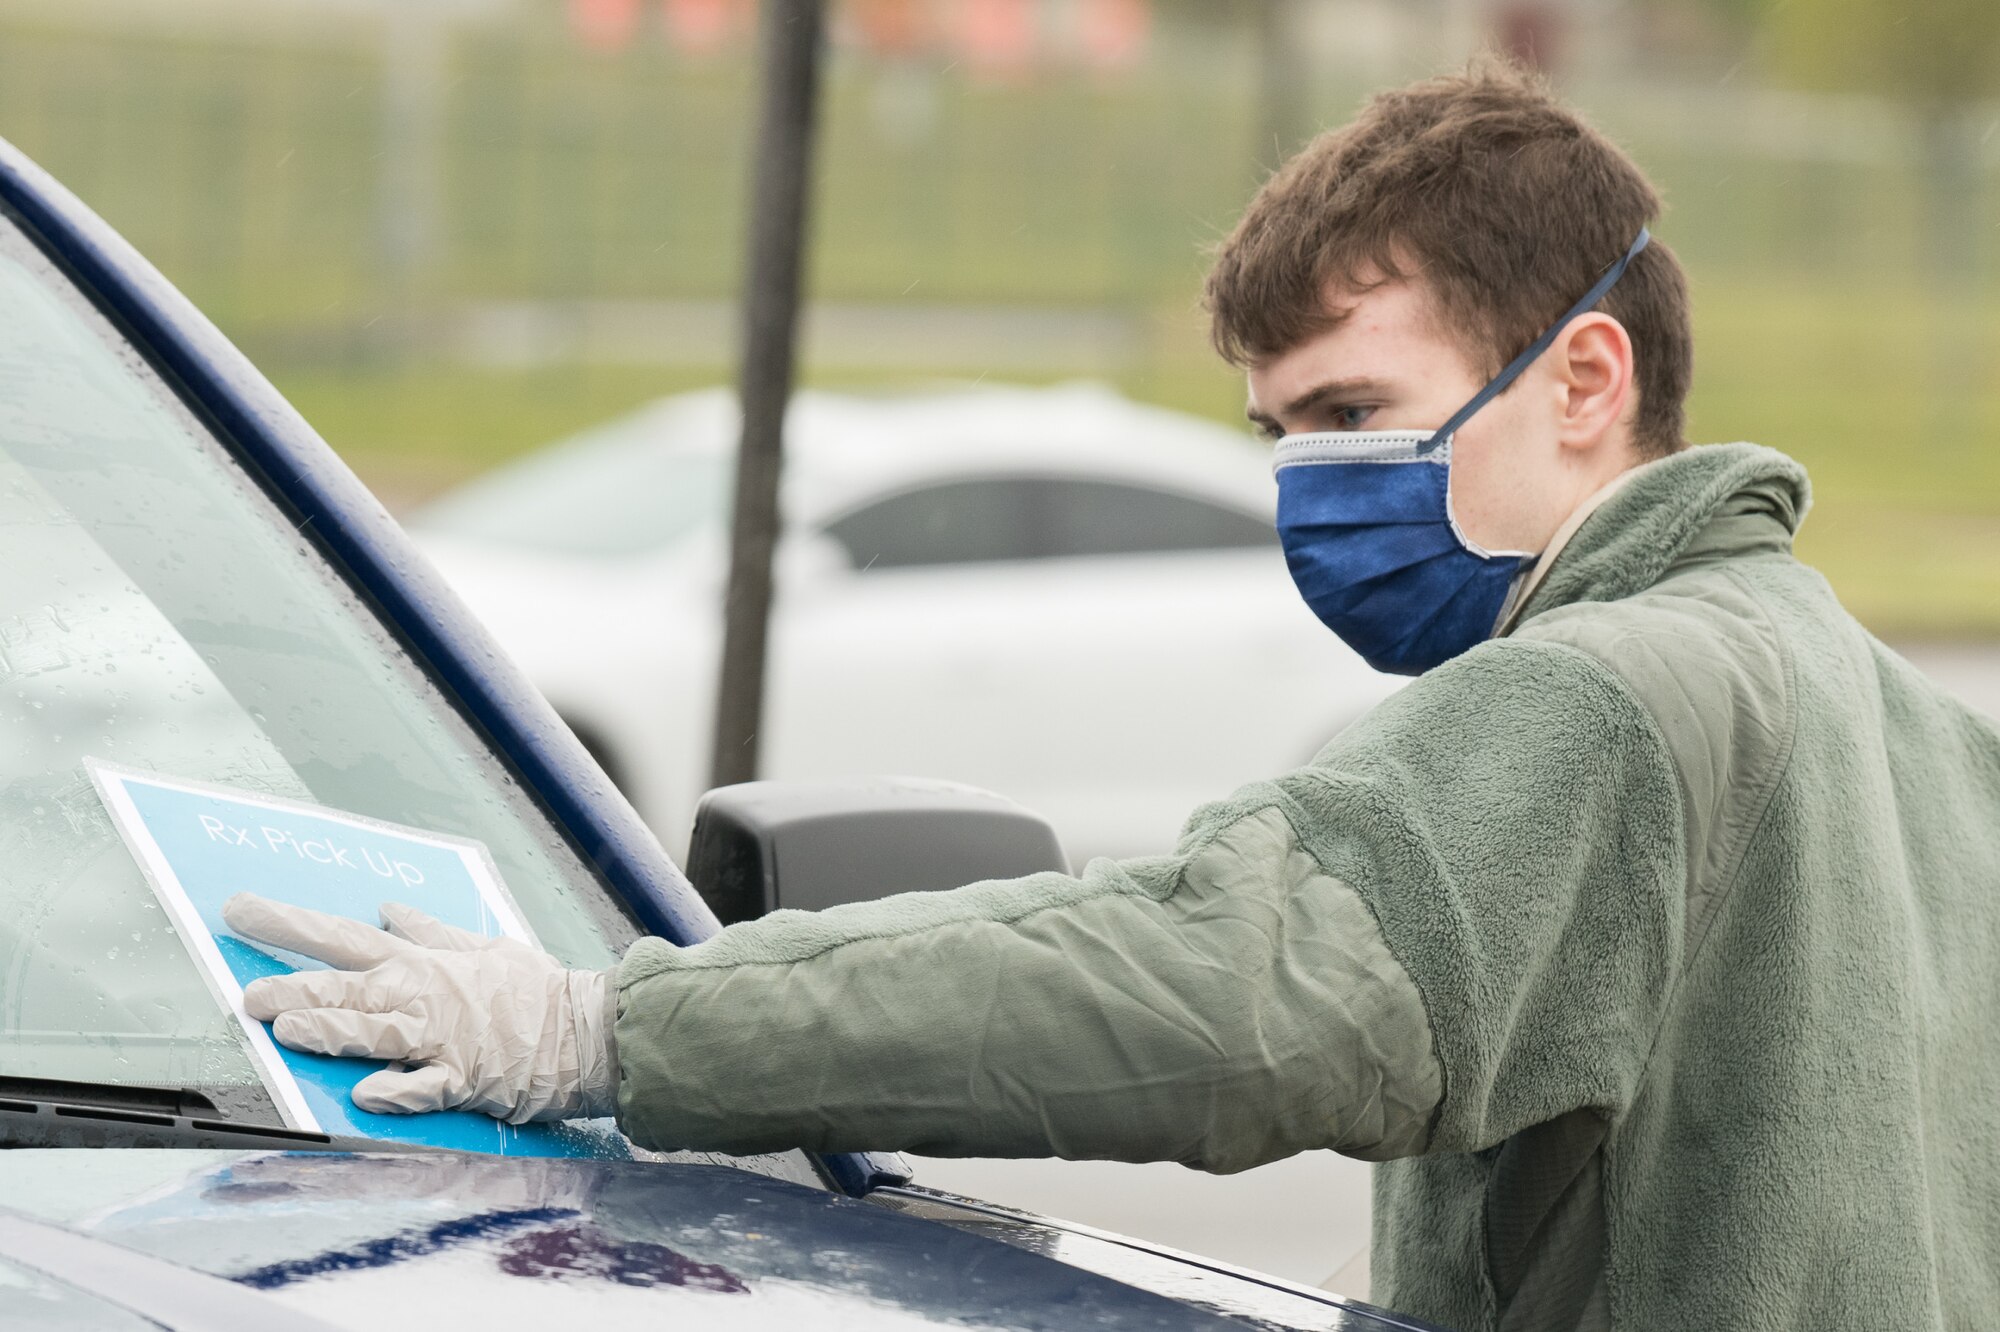 Airman 1st Class Jacob Goucher, 436th Aircraft Maintenance Squadron C-5M apprentice, places a number card on a vehicle windshield at a curbside pharmacy, April 18, 2020, at Dover Air Force Base, Delaware. The curbside project offers full pharmacy services including new prescriptions and refills, allowing Team Dover to access prescriptions and maintain social distancing. (U.S. Air Force photo by Mauricio Campino)